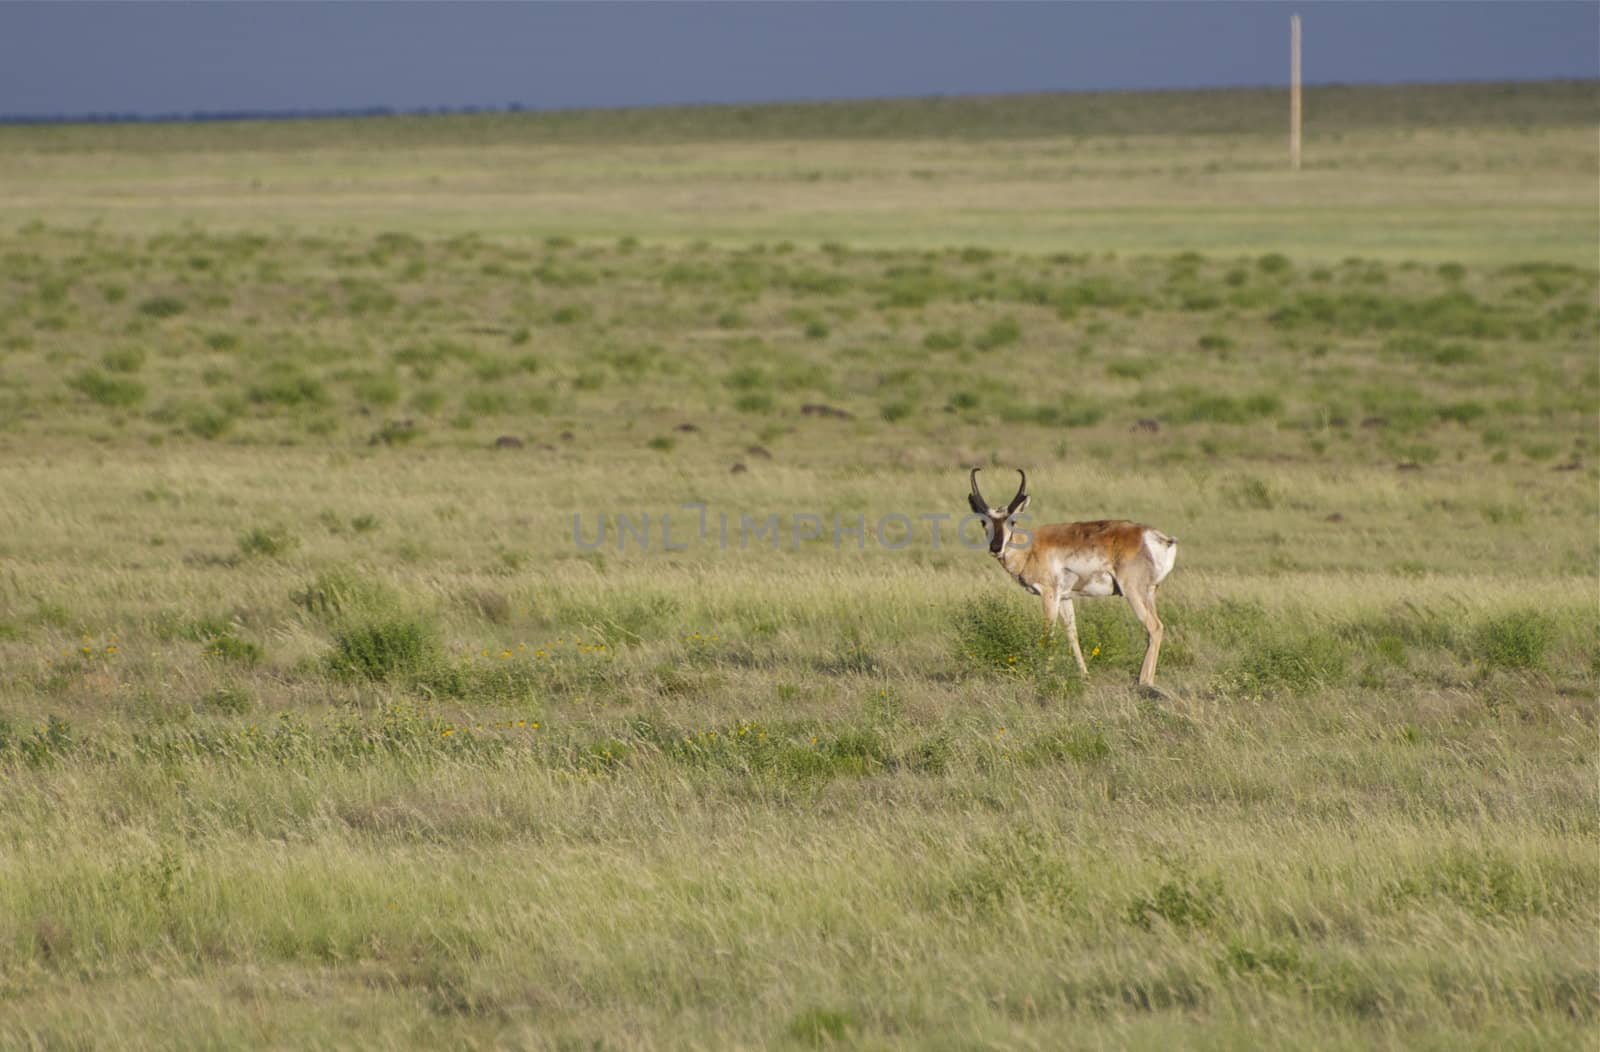 Single Pronghorn Antelope by gilmourbto2001